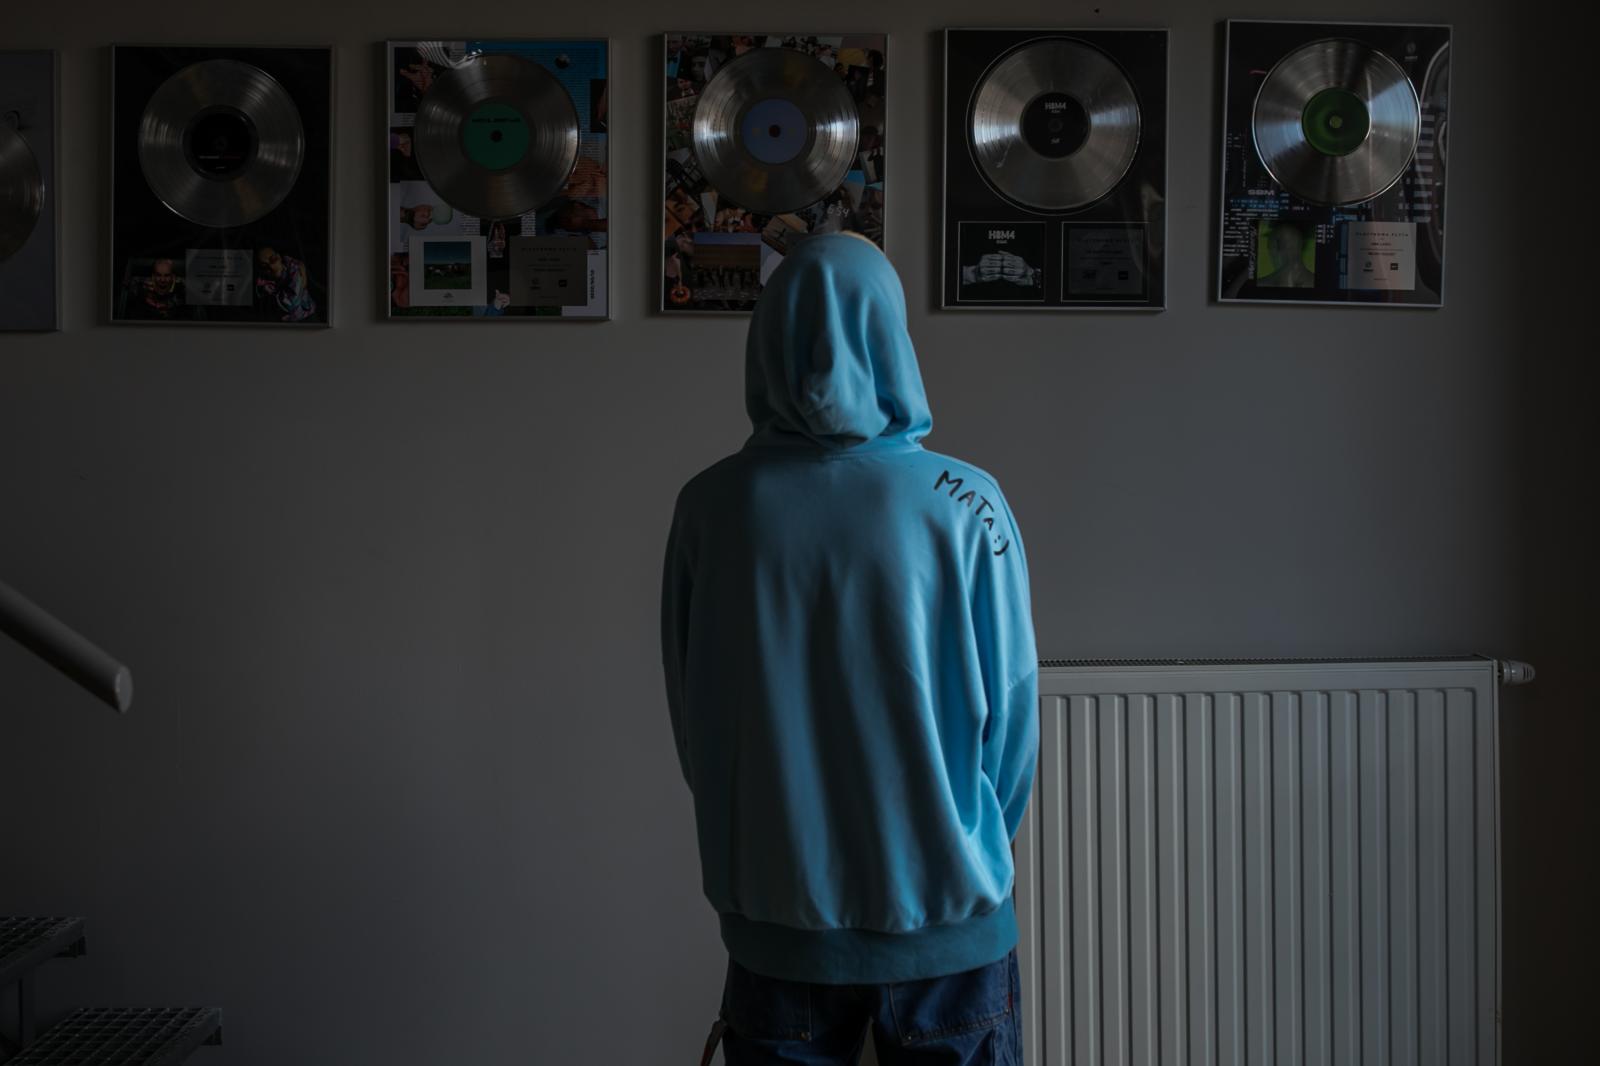 A POLISH RAPPER GOES FROM SCANDAL TO SUPERSTAR- for NYTimes